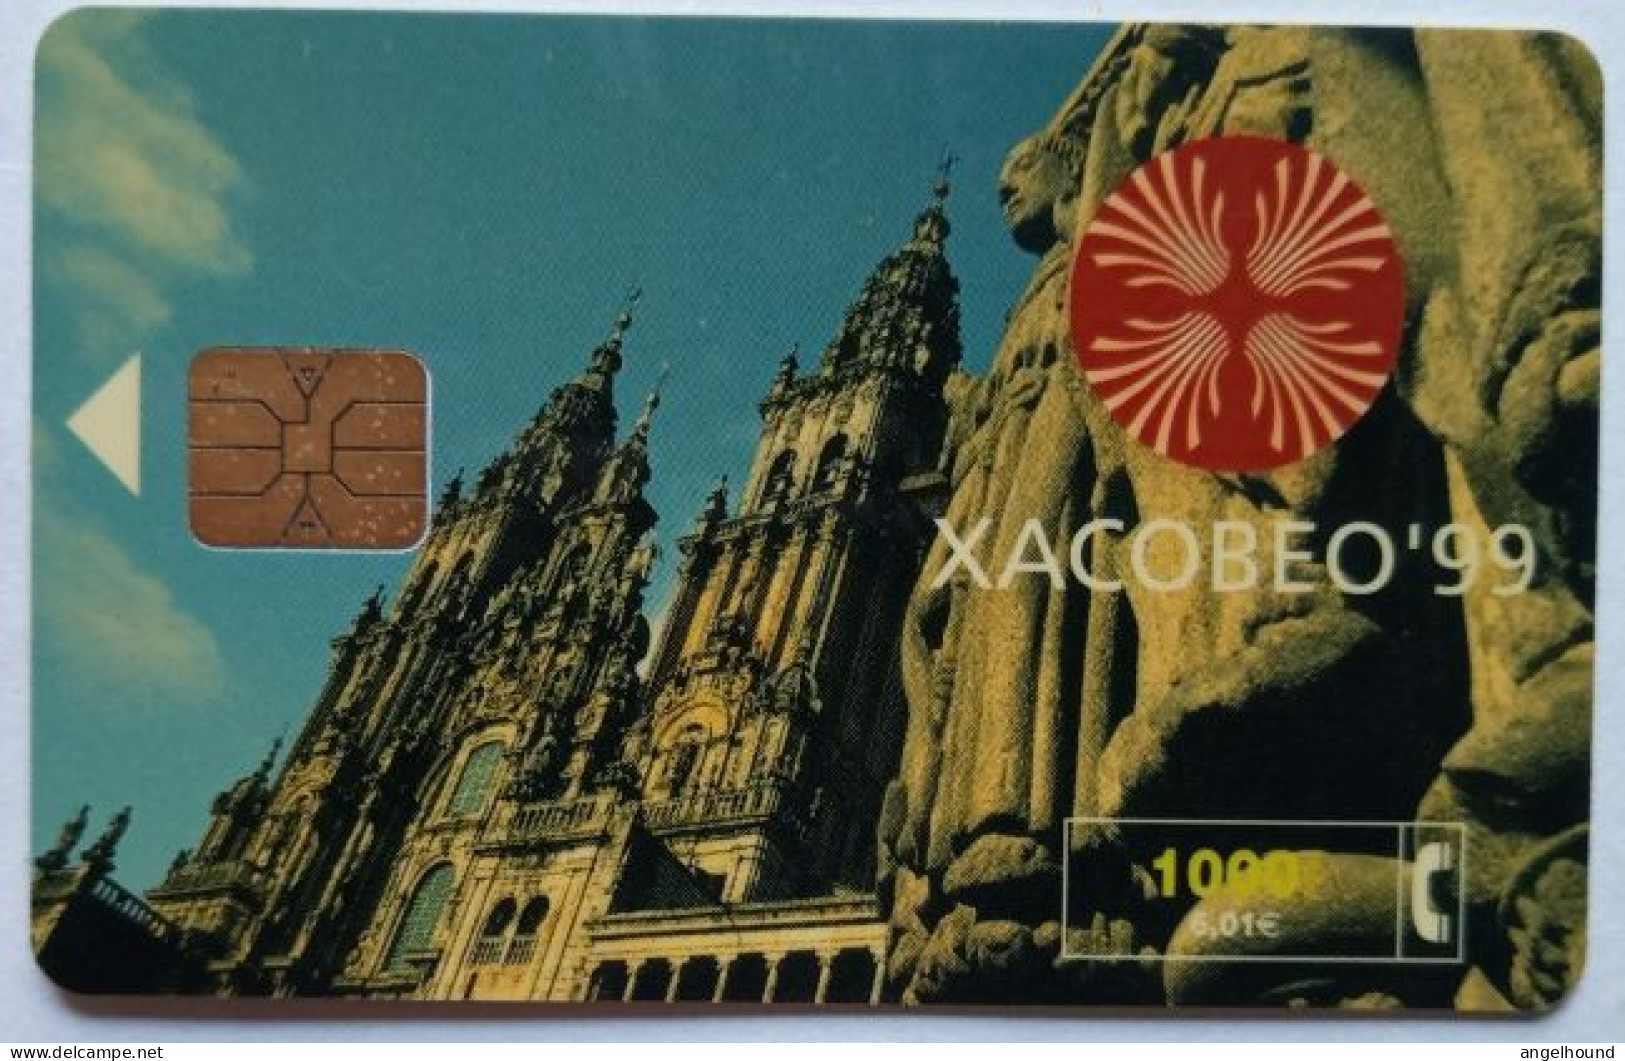 Spain 1000 Pta. Chip Card - Xacobeo 99 - Basic Issues